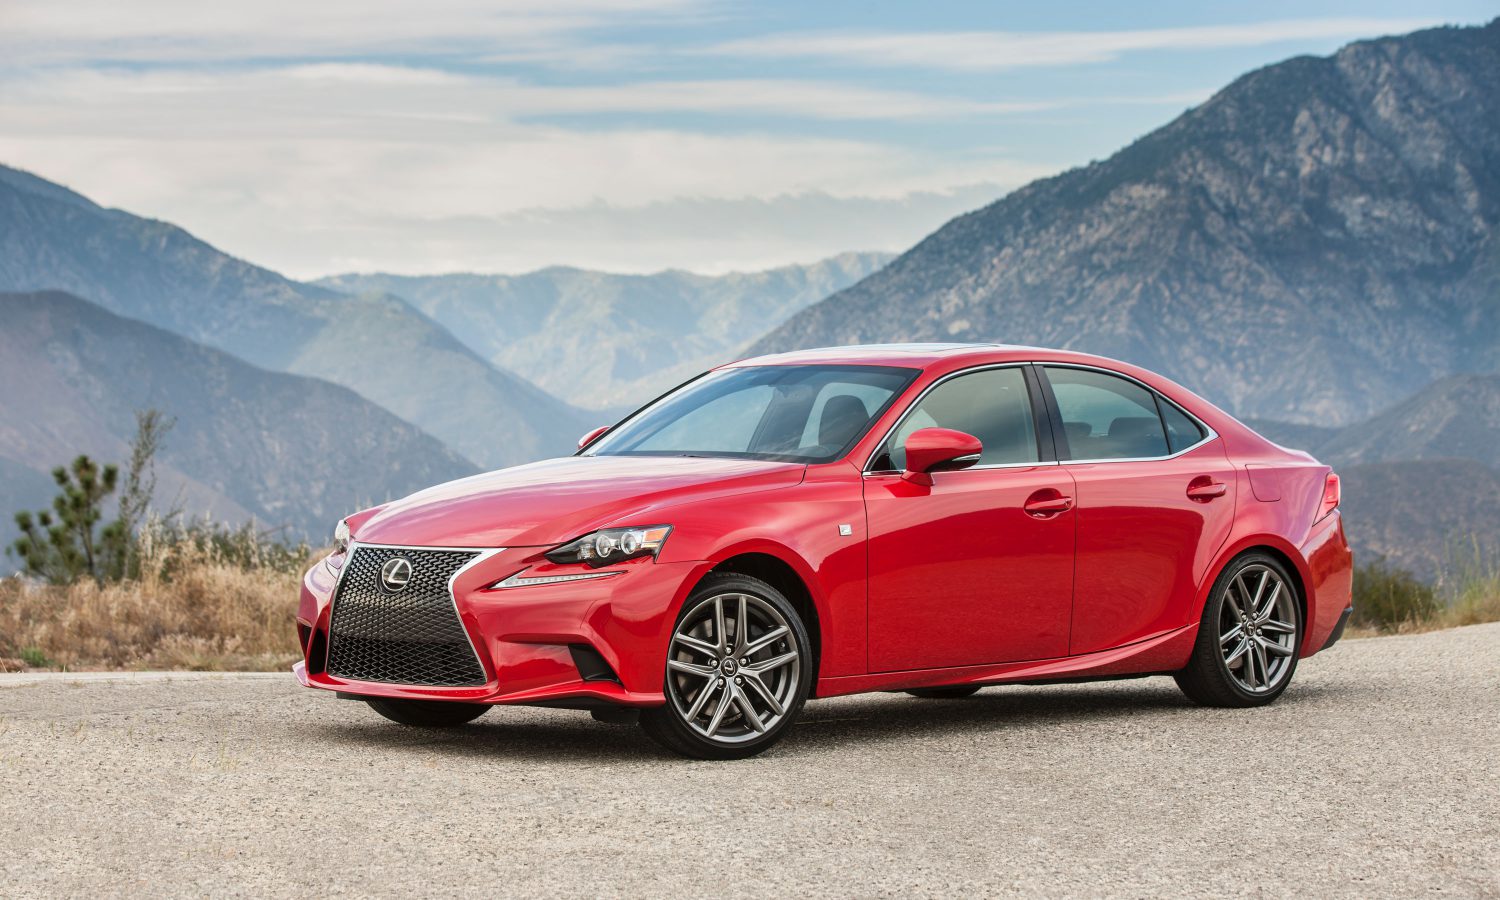 Lexus IS Sport Sedan Gets Revved Up In 2016 With Three Available Engines -  Lexus USA Newsroom